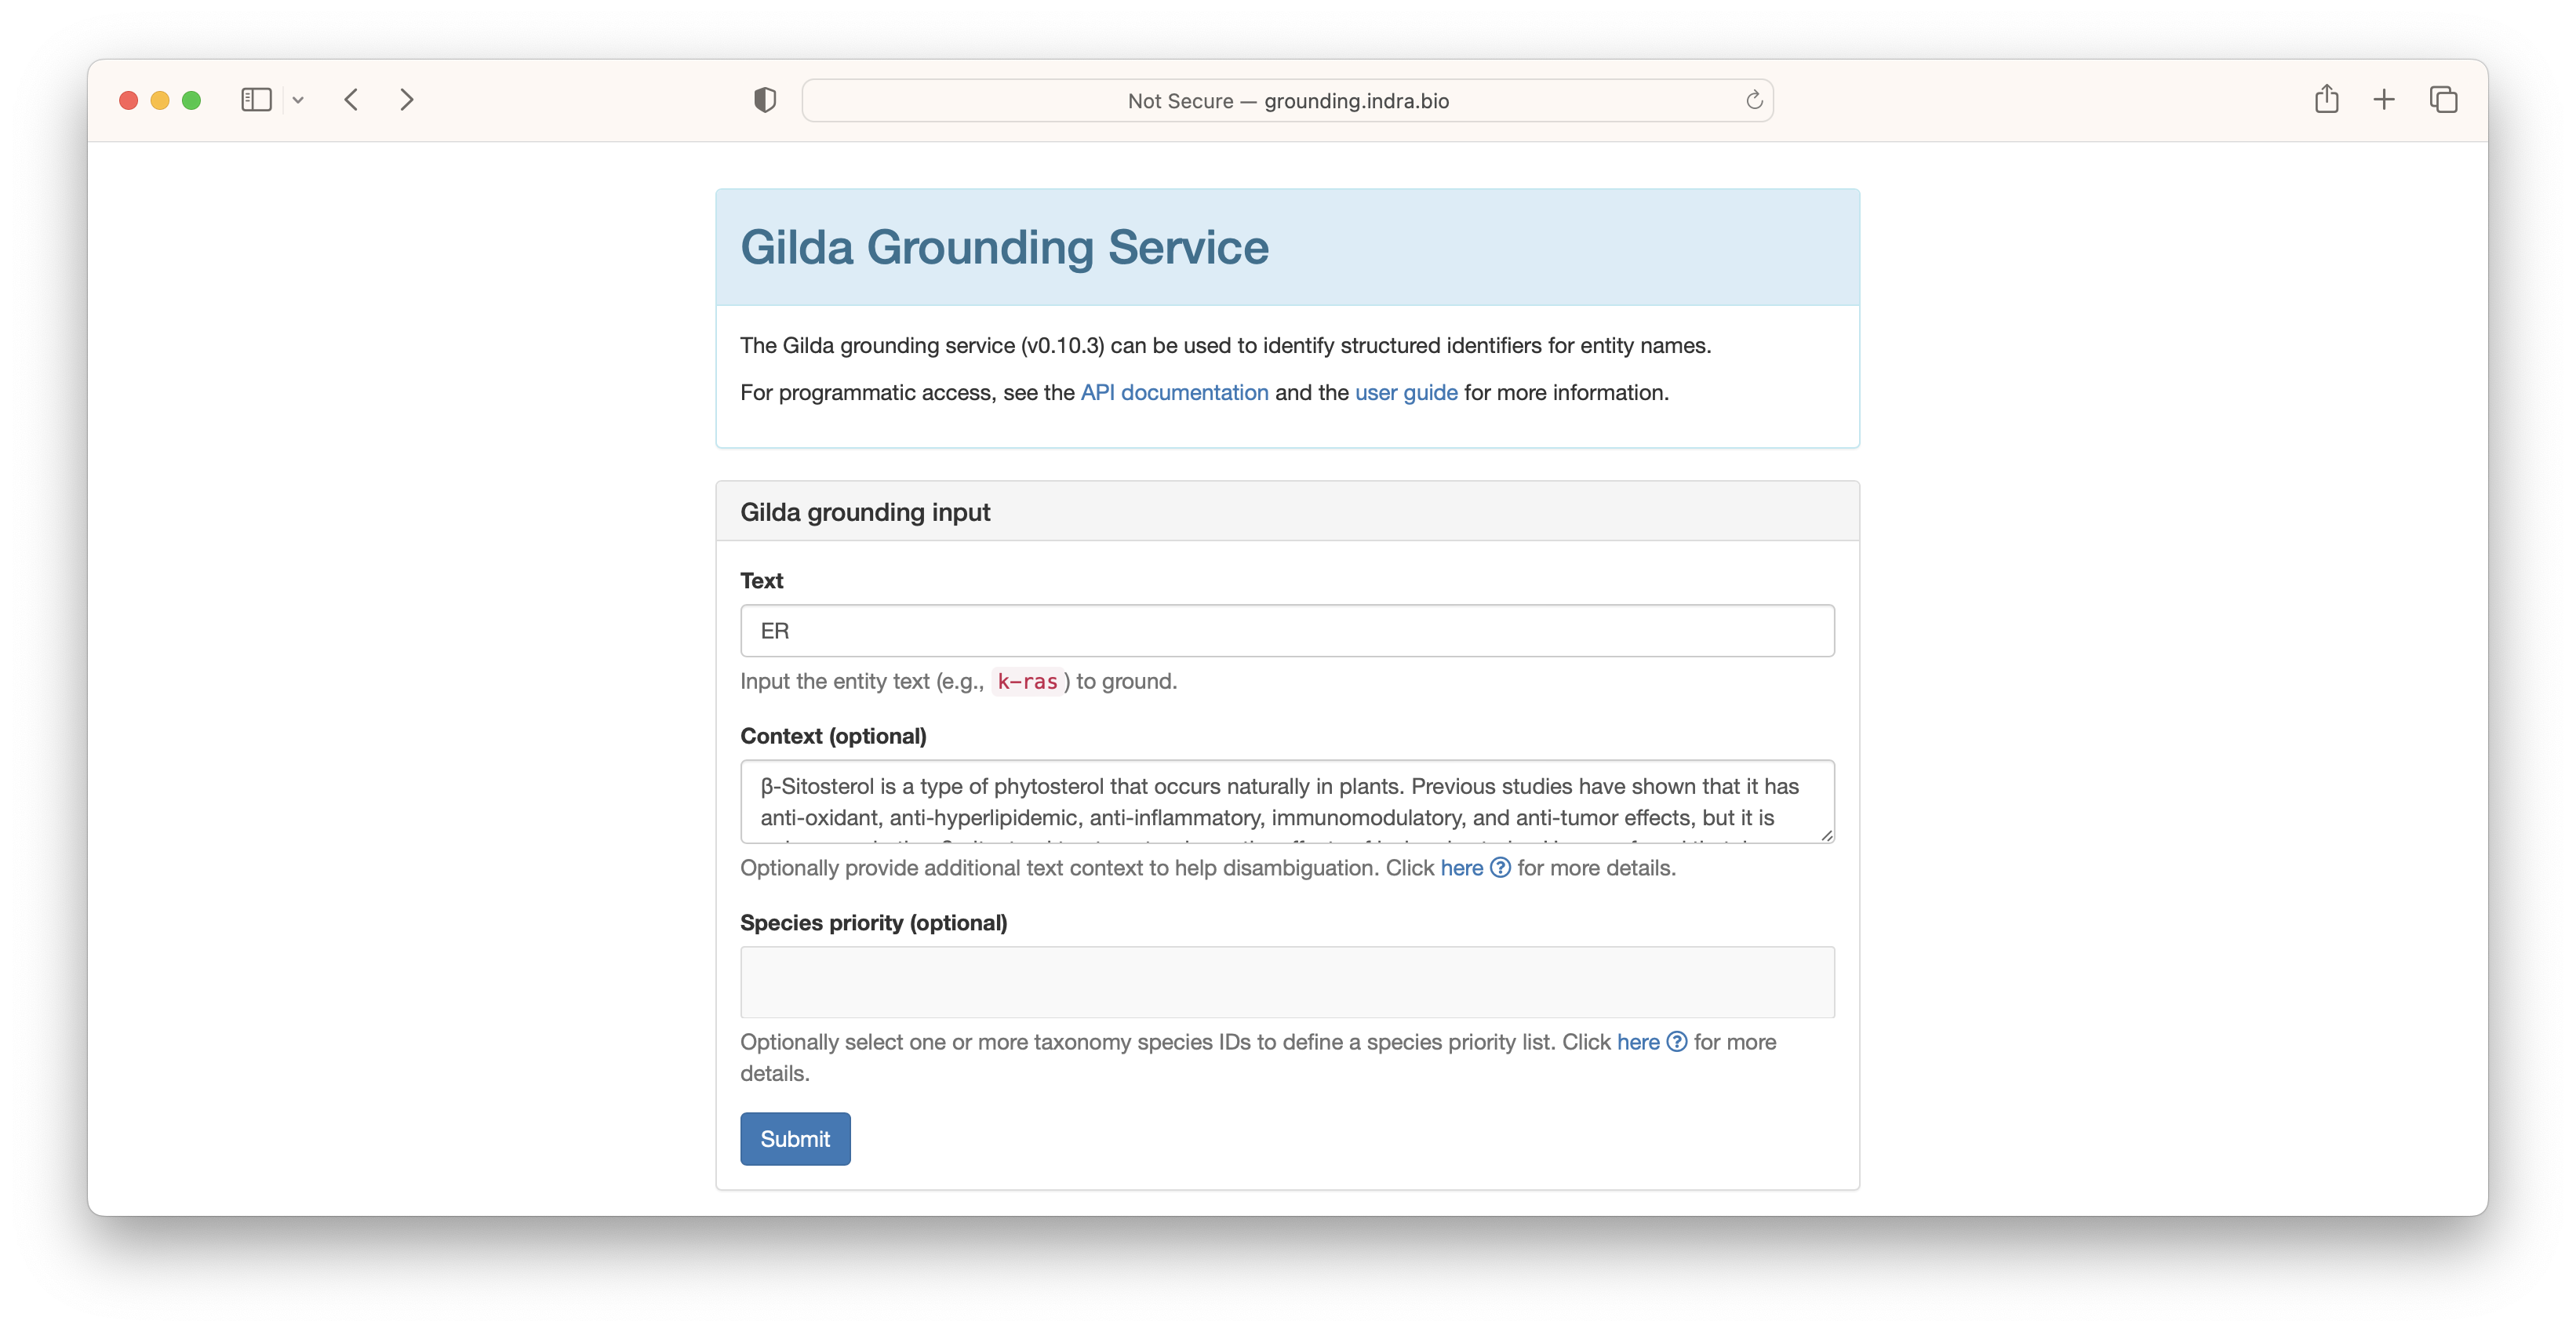 Using the Gilda web form to ground "ER" with a context paragraph